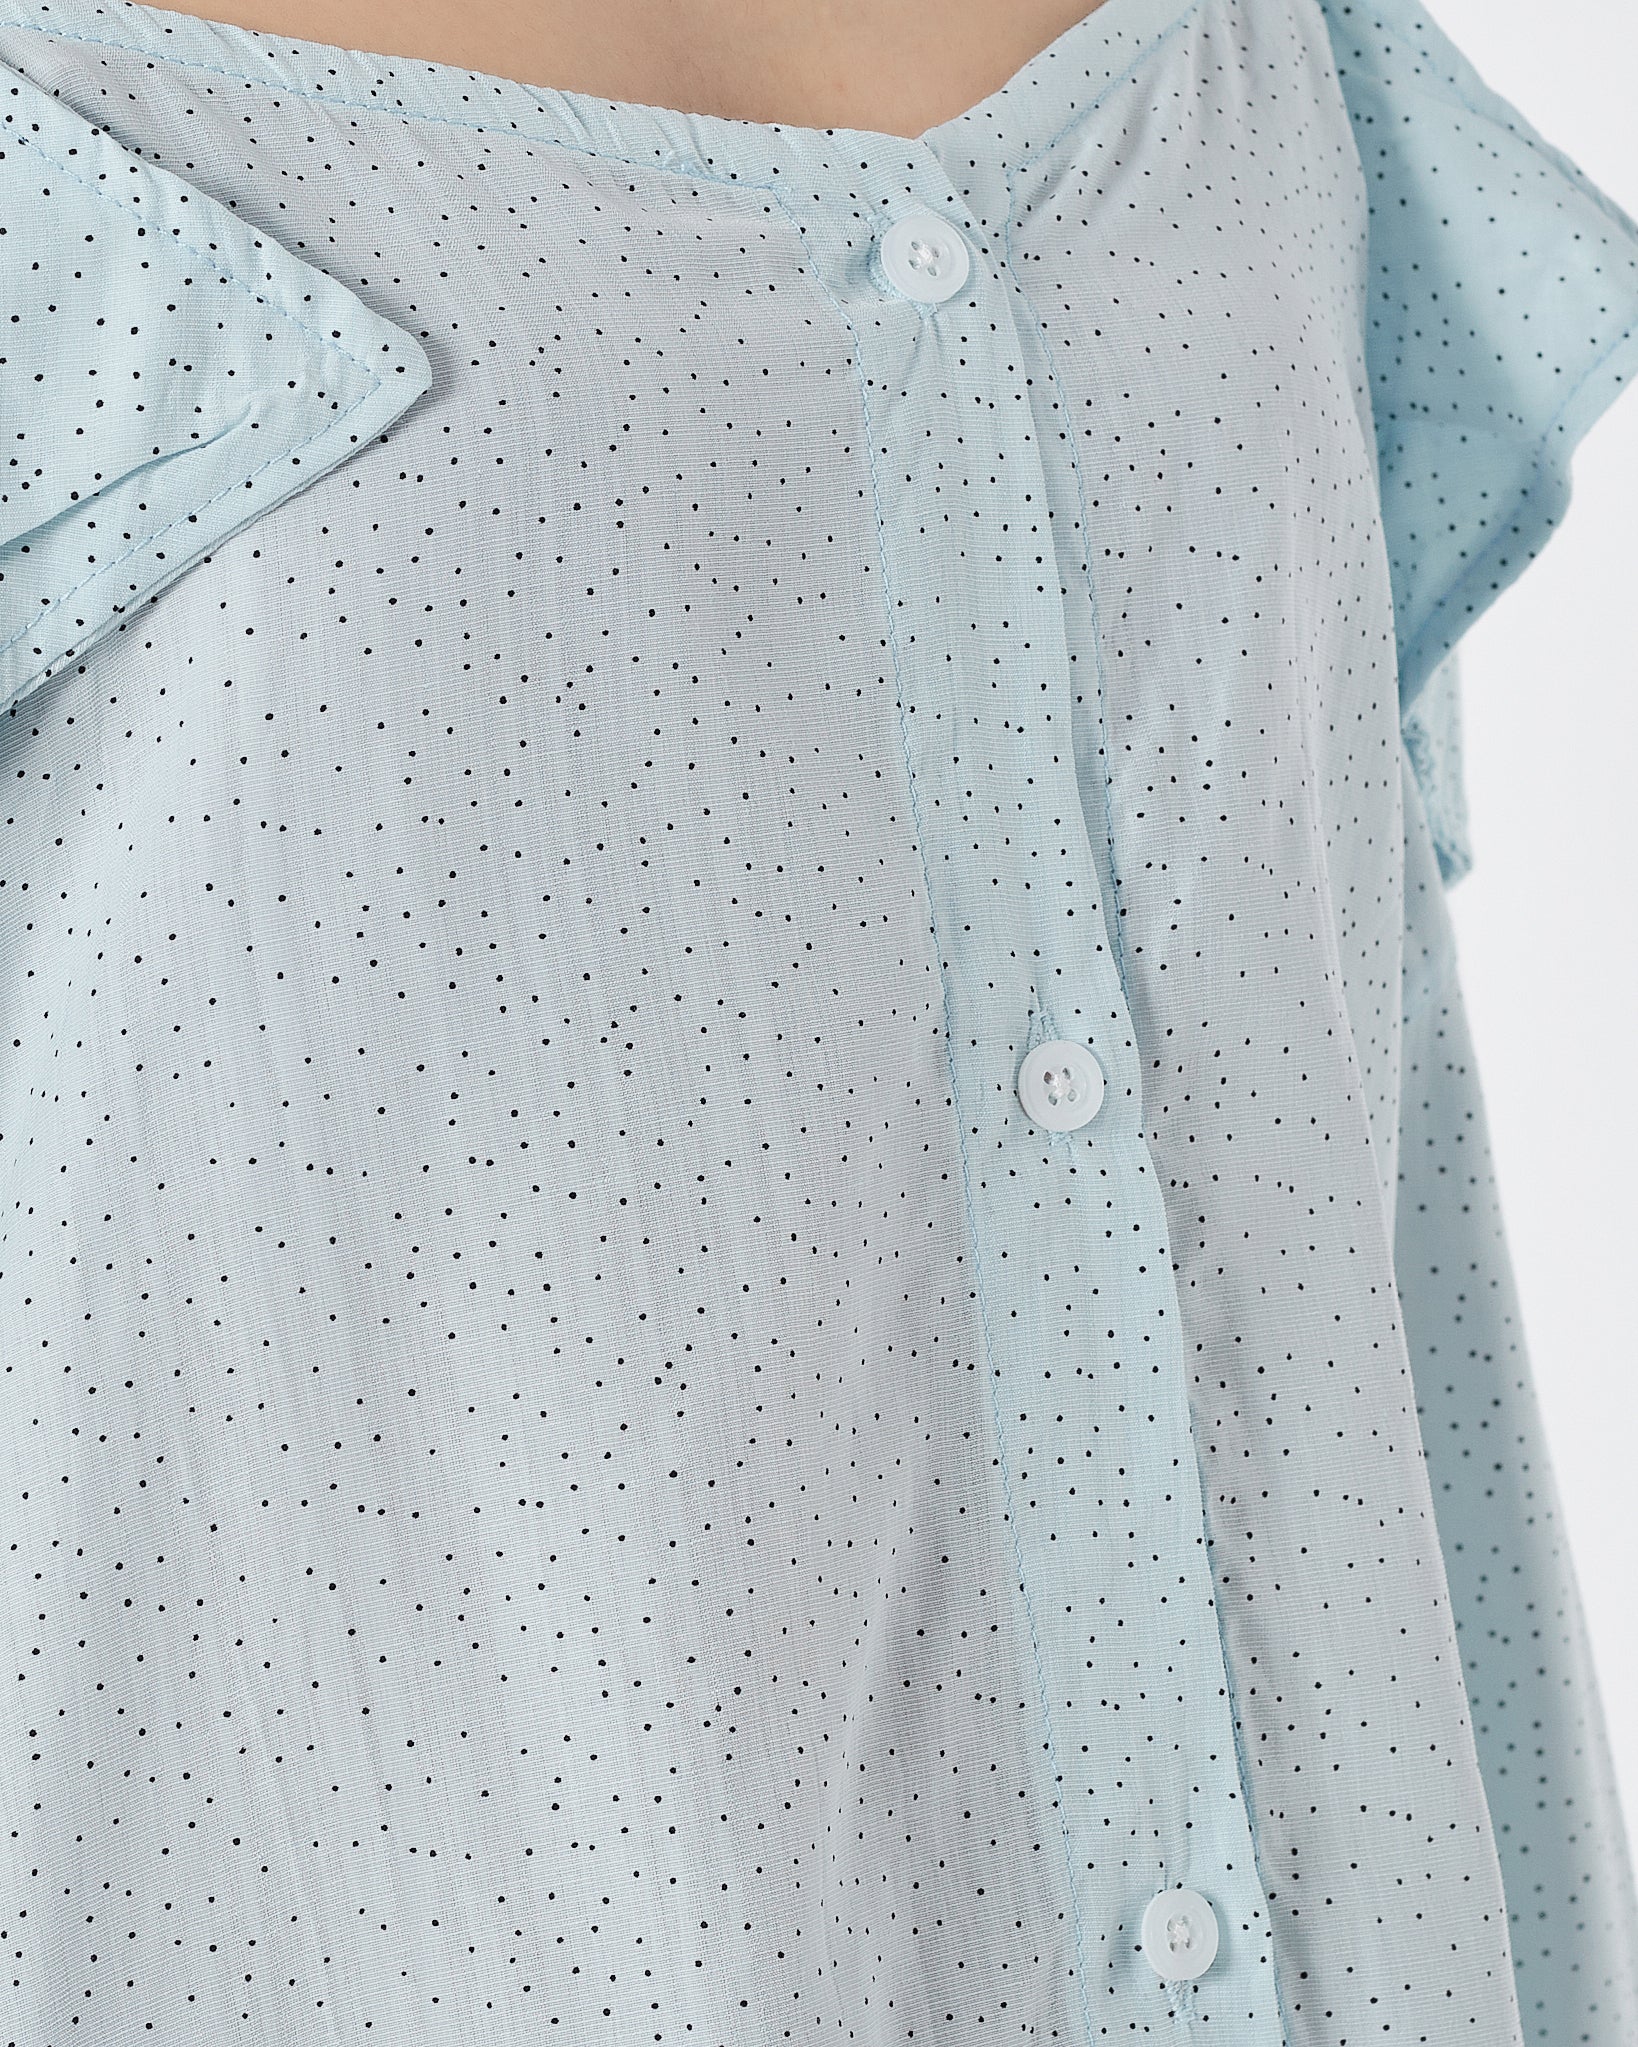 Dots Over Printed Light Blue Lady Shirts Long Sleeve 14.90